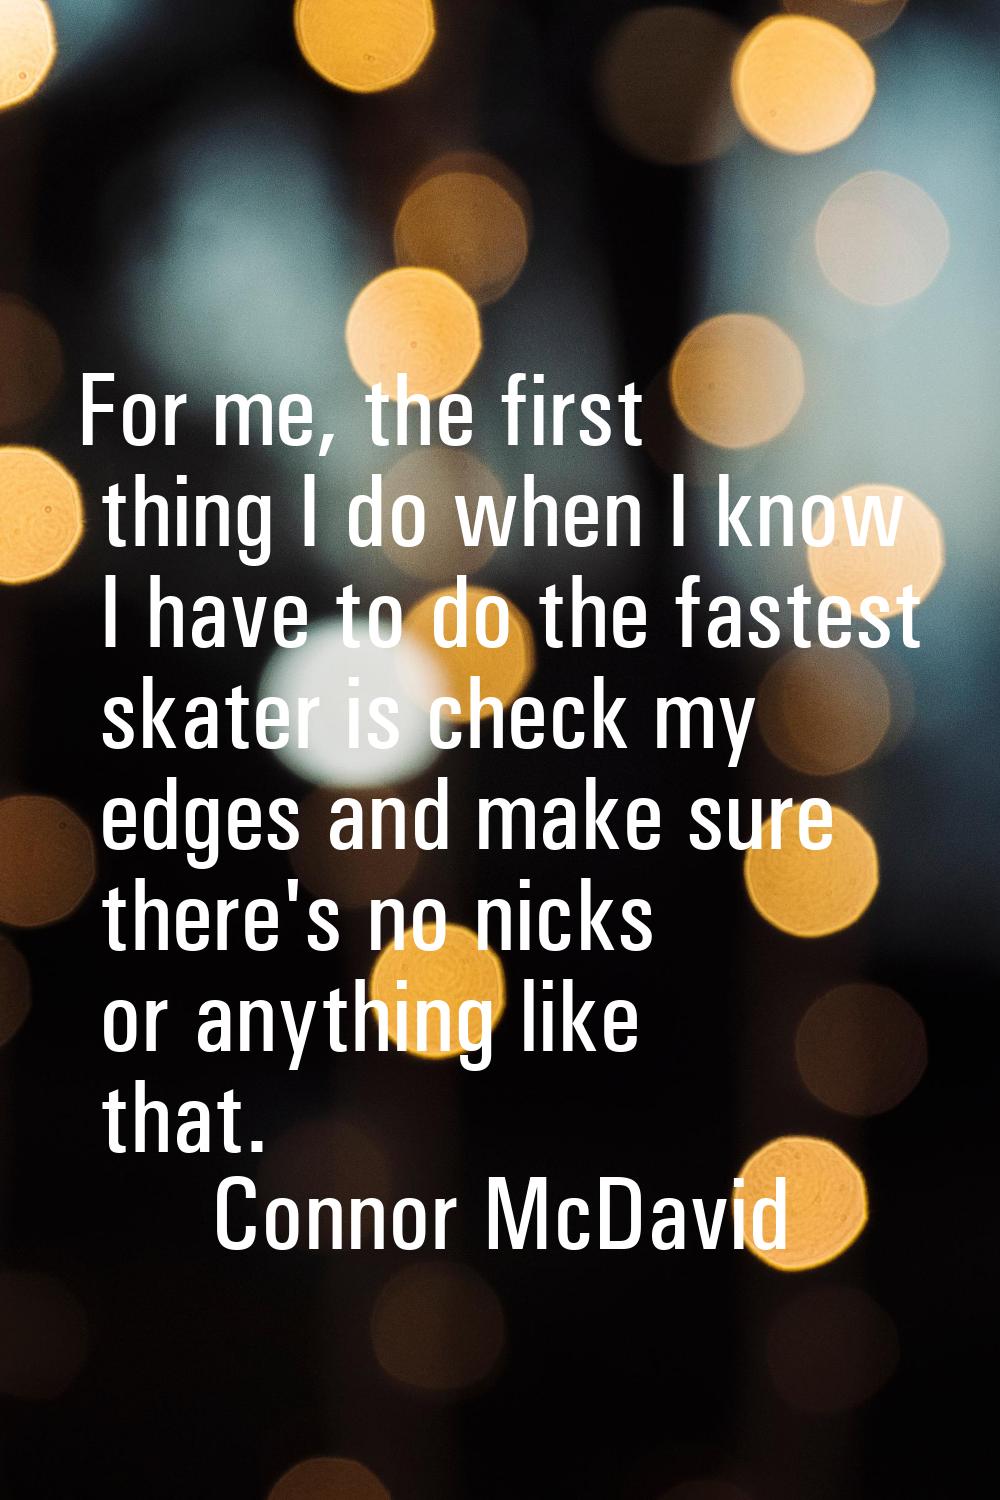 For me, the first thing I do when I know I have to do the fastest skater is check my edges and make